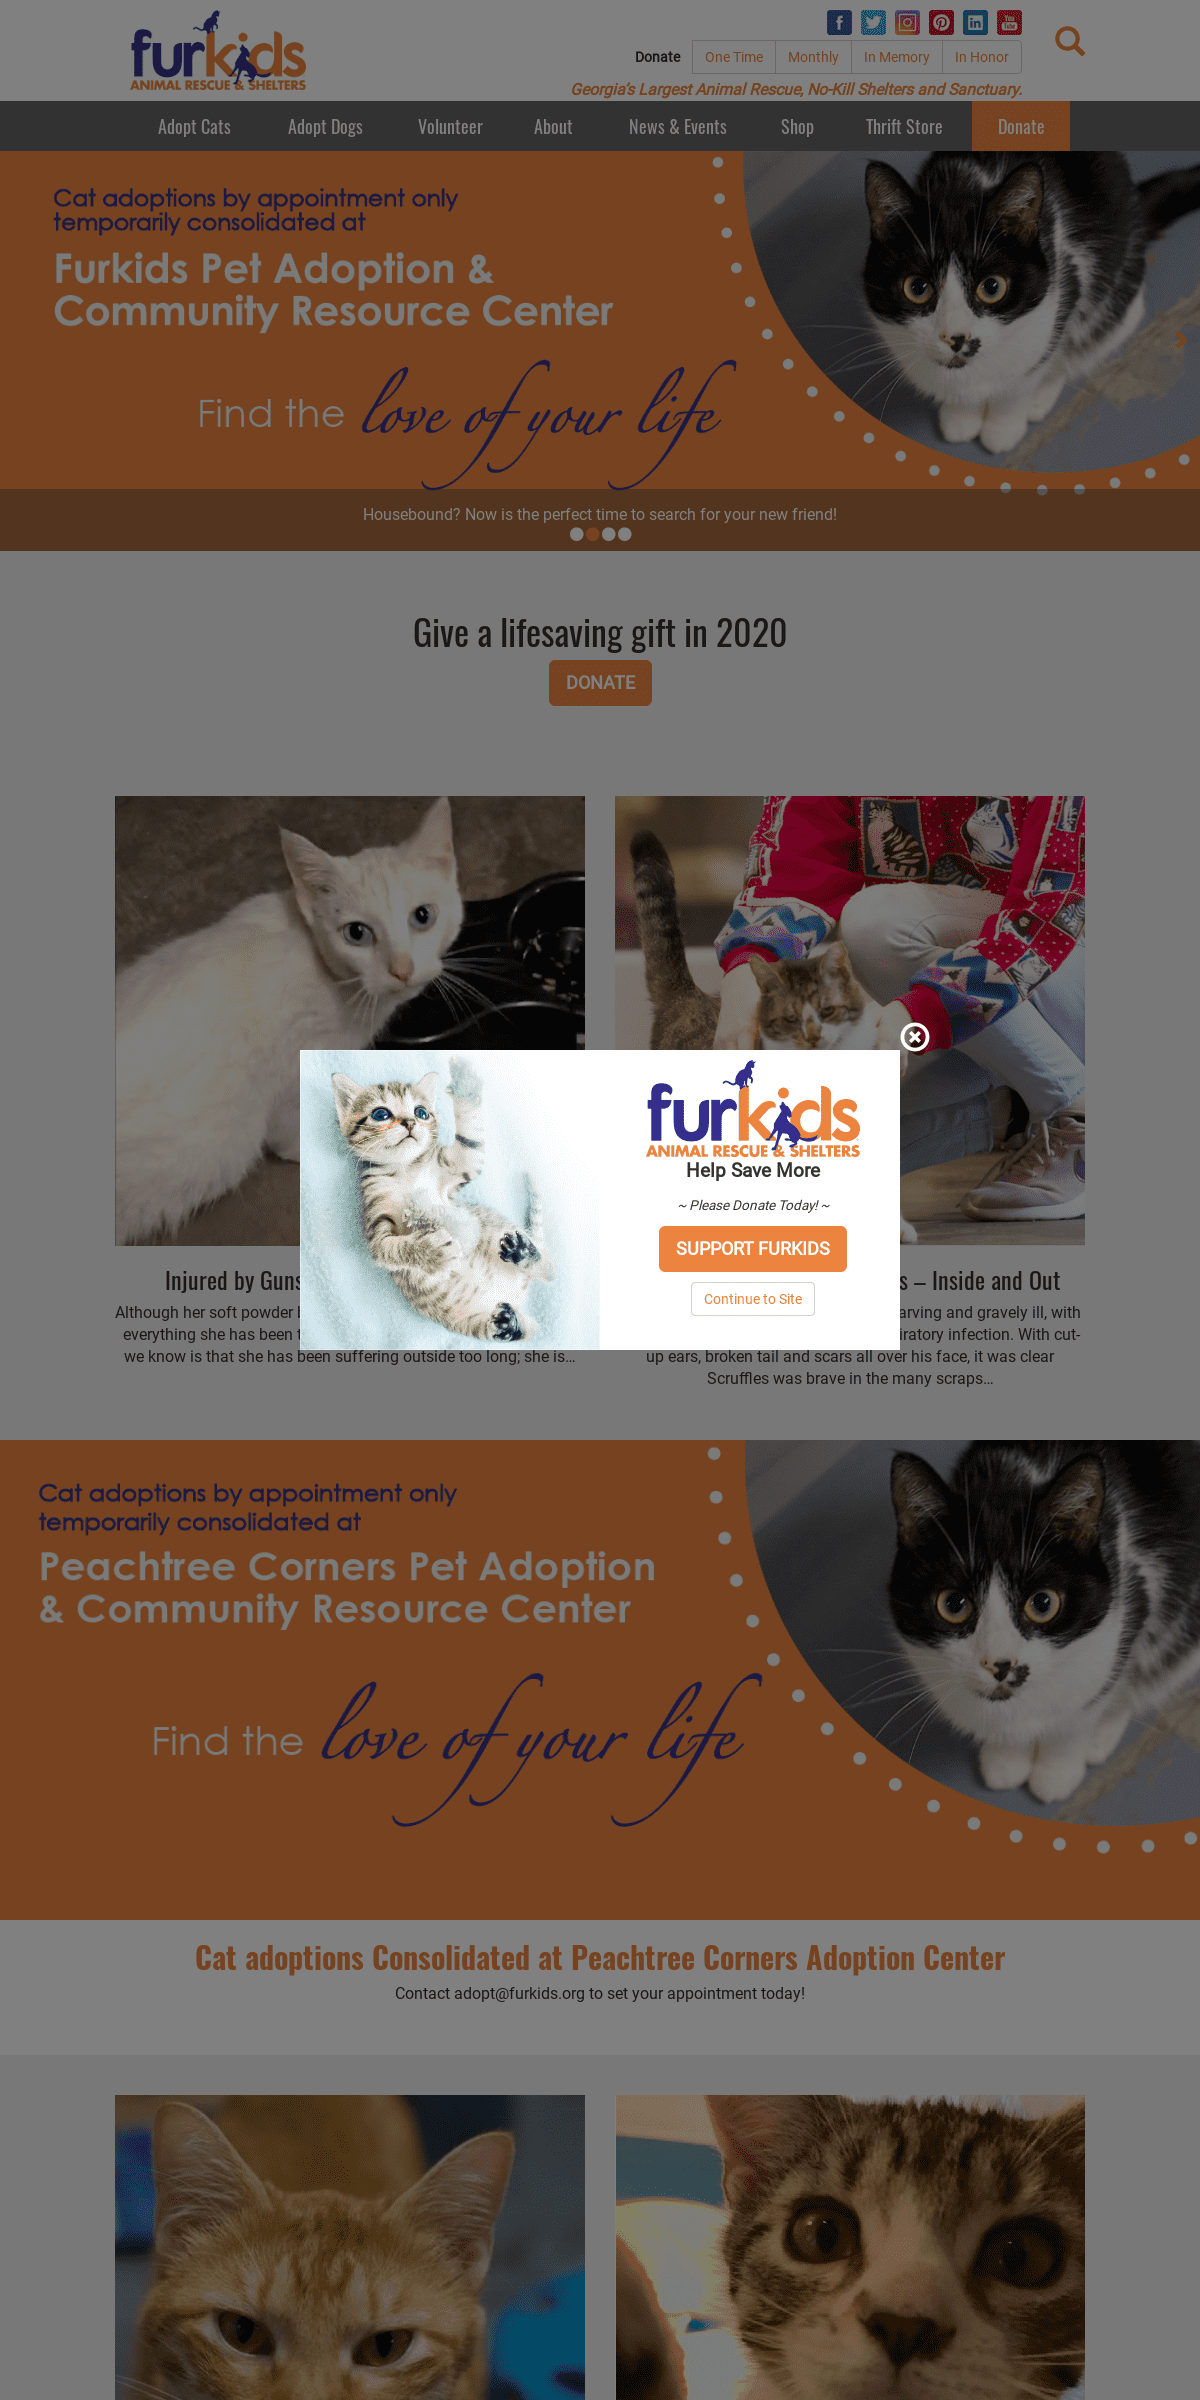 A complete backup of furkids.org